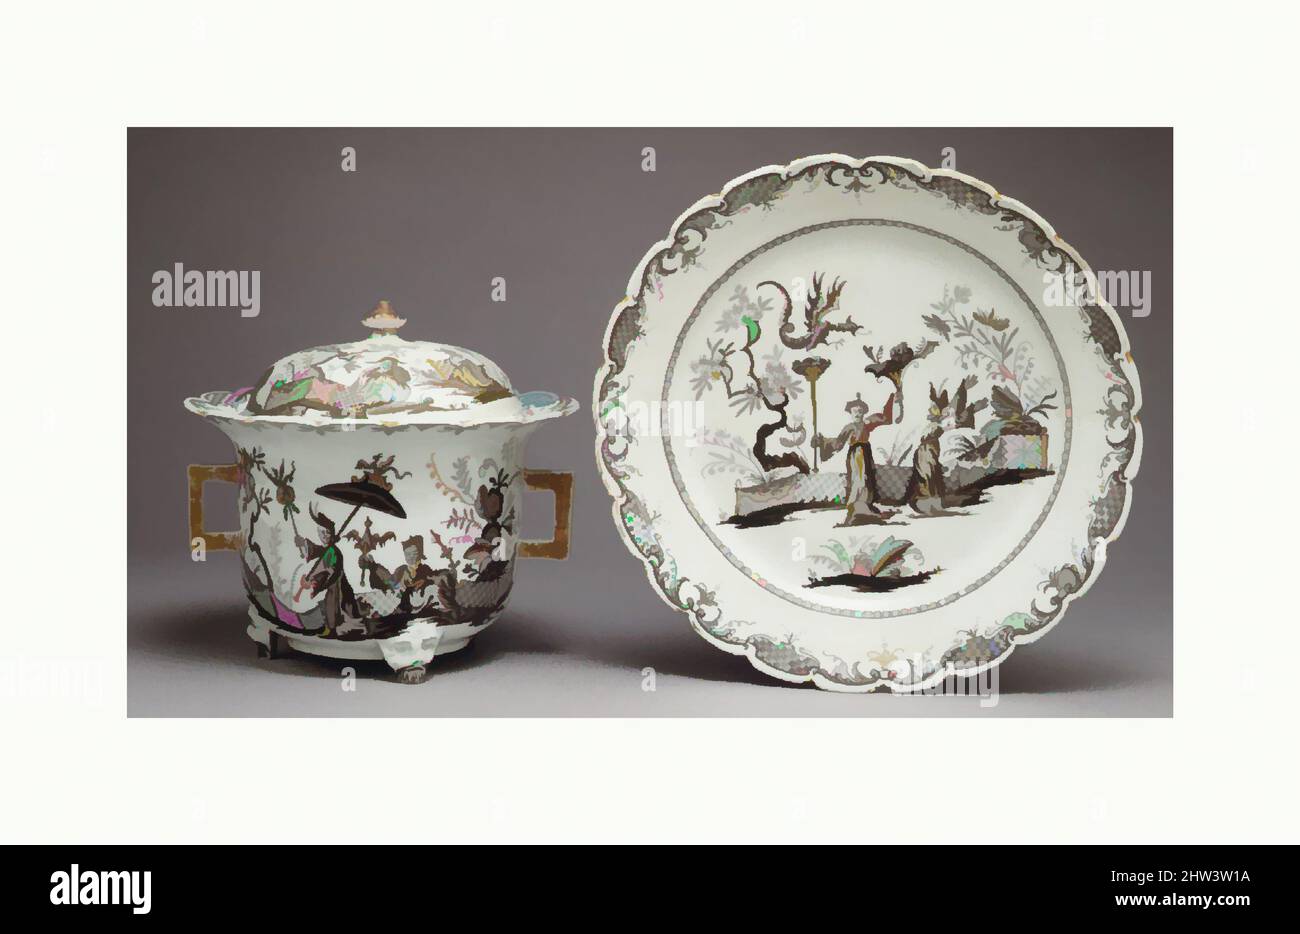 Art inspired by Ollio pot with cover and stand, ca. 1725, Austrian, Vienna, Hard-paste porcelain, Pot and cover (.2a, b): H: 6 1/4 in. (15.9 cm.); H. to rim 4 1/2 in. (11.4 cm.); Diam. pot 6 3/4 in. (17.1 cm.); Stand (.2c): Diam. 8 3/4 in. (22.2 cm.), Ceramics-Porcelain, After a design, Classic works modernized by Artotop with a splash of modernity. Shapes, color and value, eye-catching visual impact on art. Emotions through freedom of artworks in a contemporary way. A timeless message pursuing a wildly creative new direction. Artists turning to the digital medium and creating the Artotop NFT Stock Photo